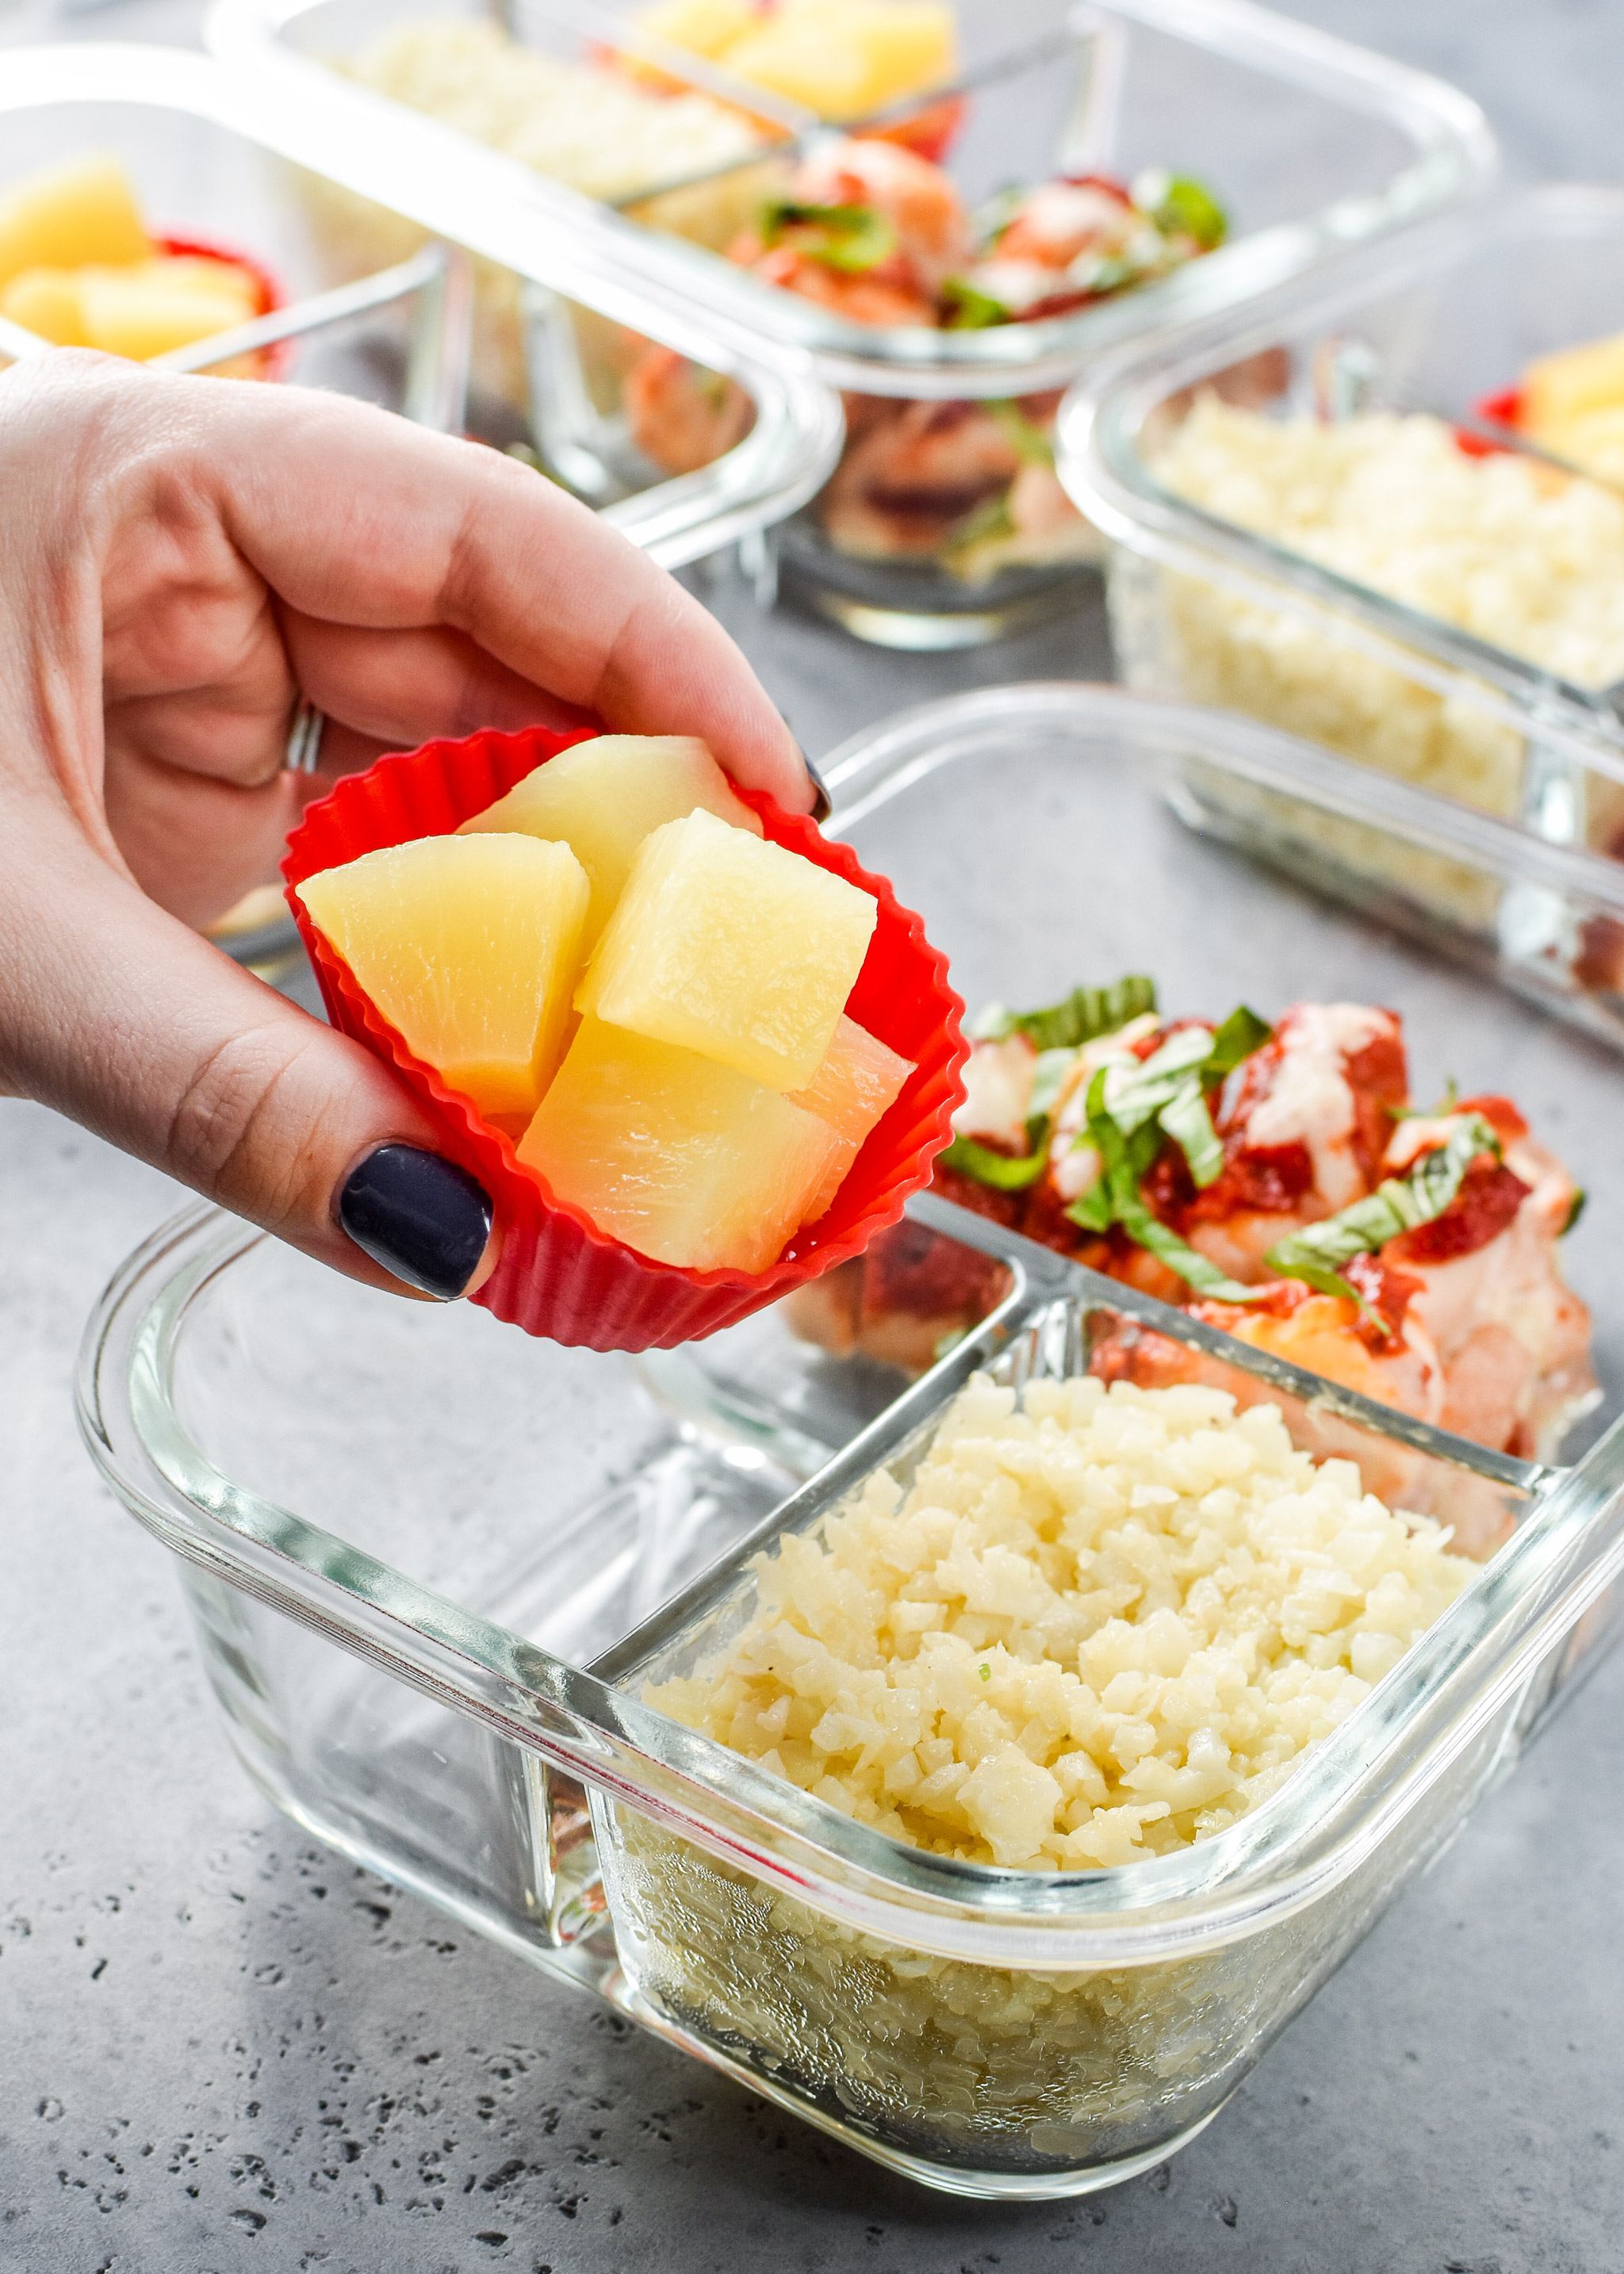 Pizza chicken roll ups meal prep with pineapple inside silicone baking containers for easy removal.